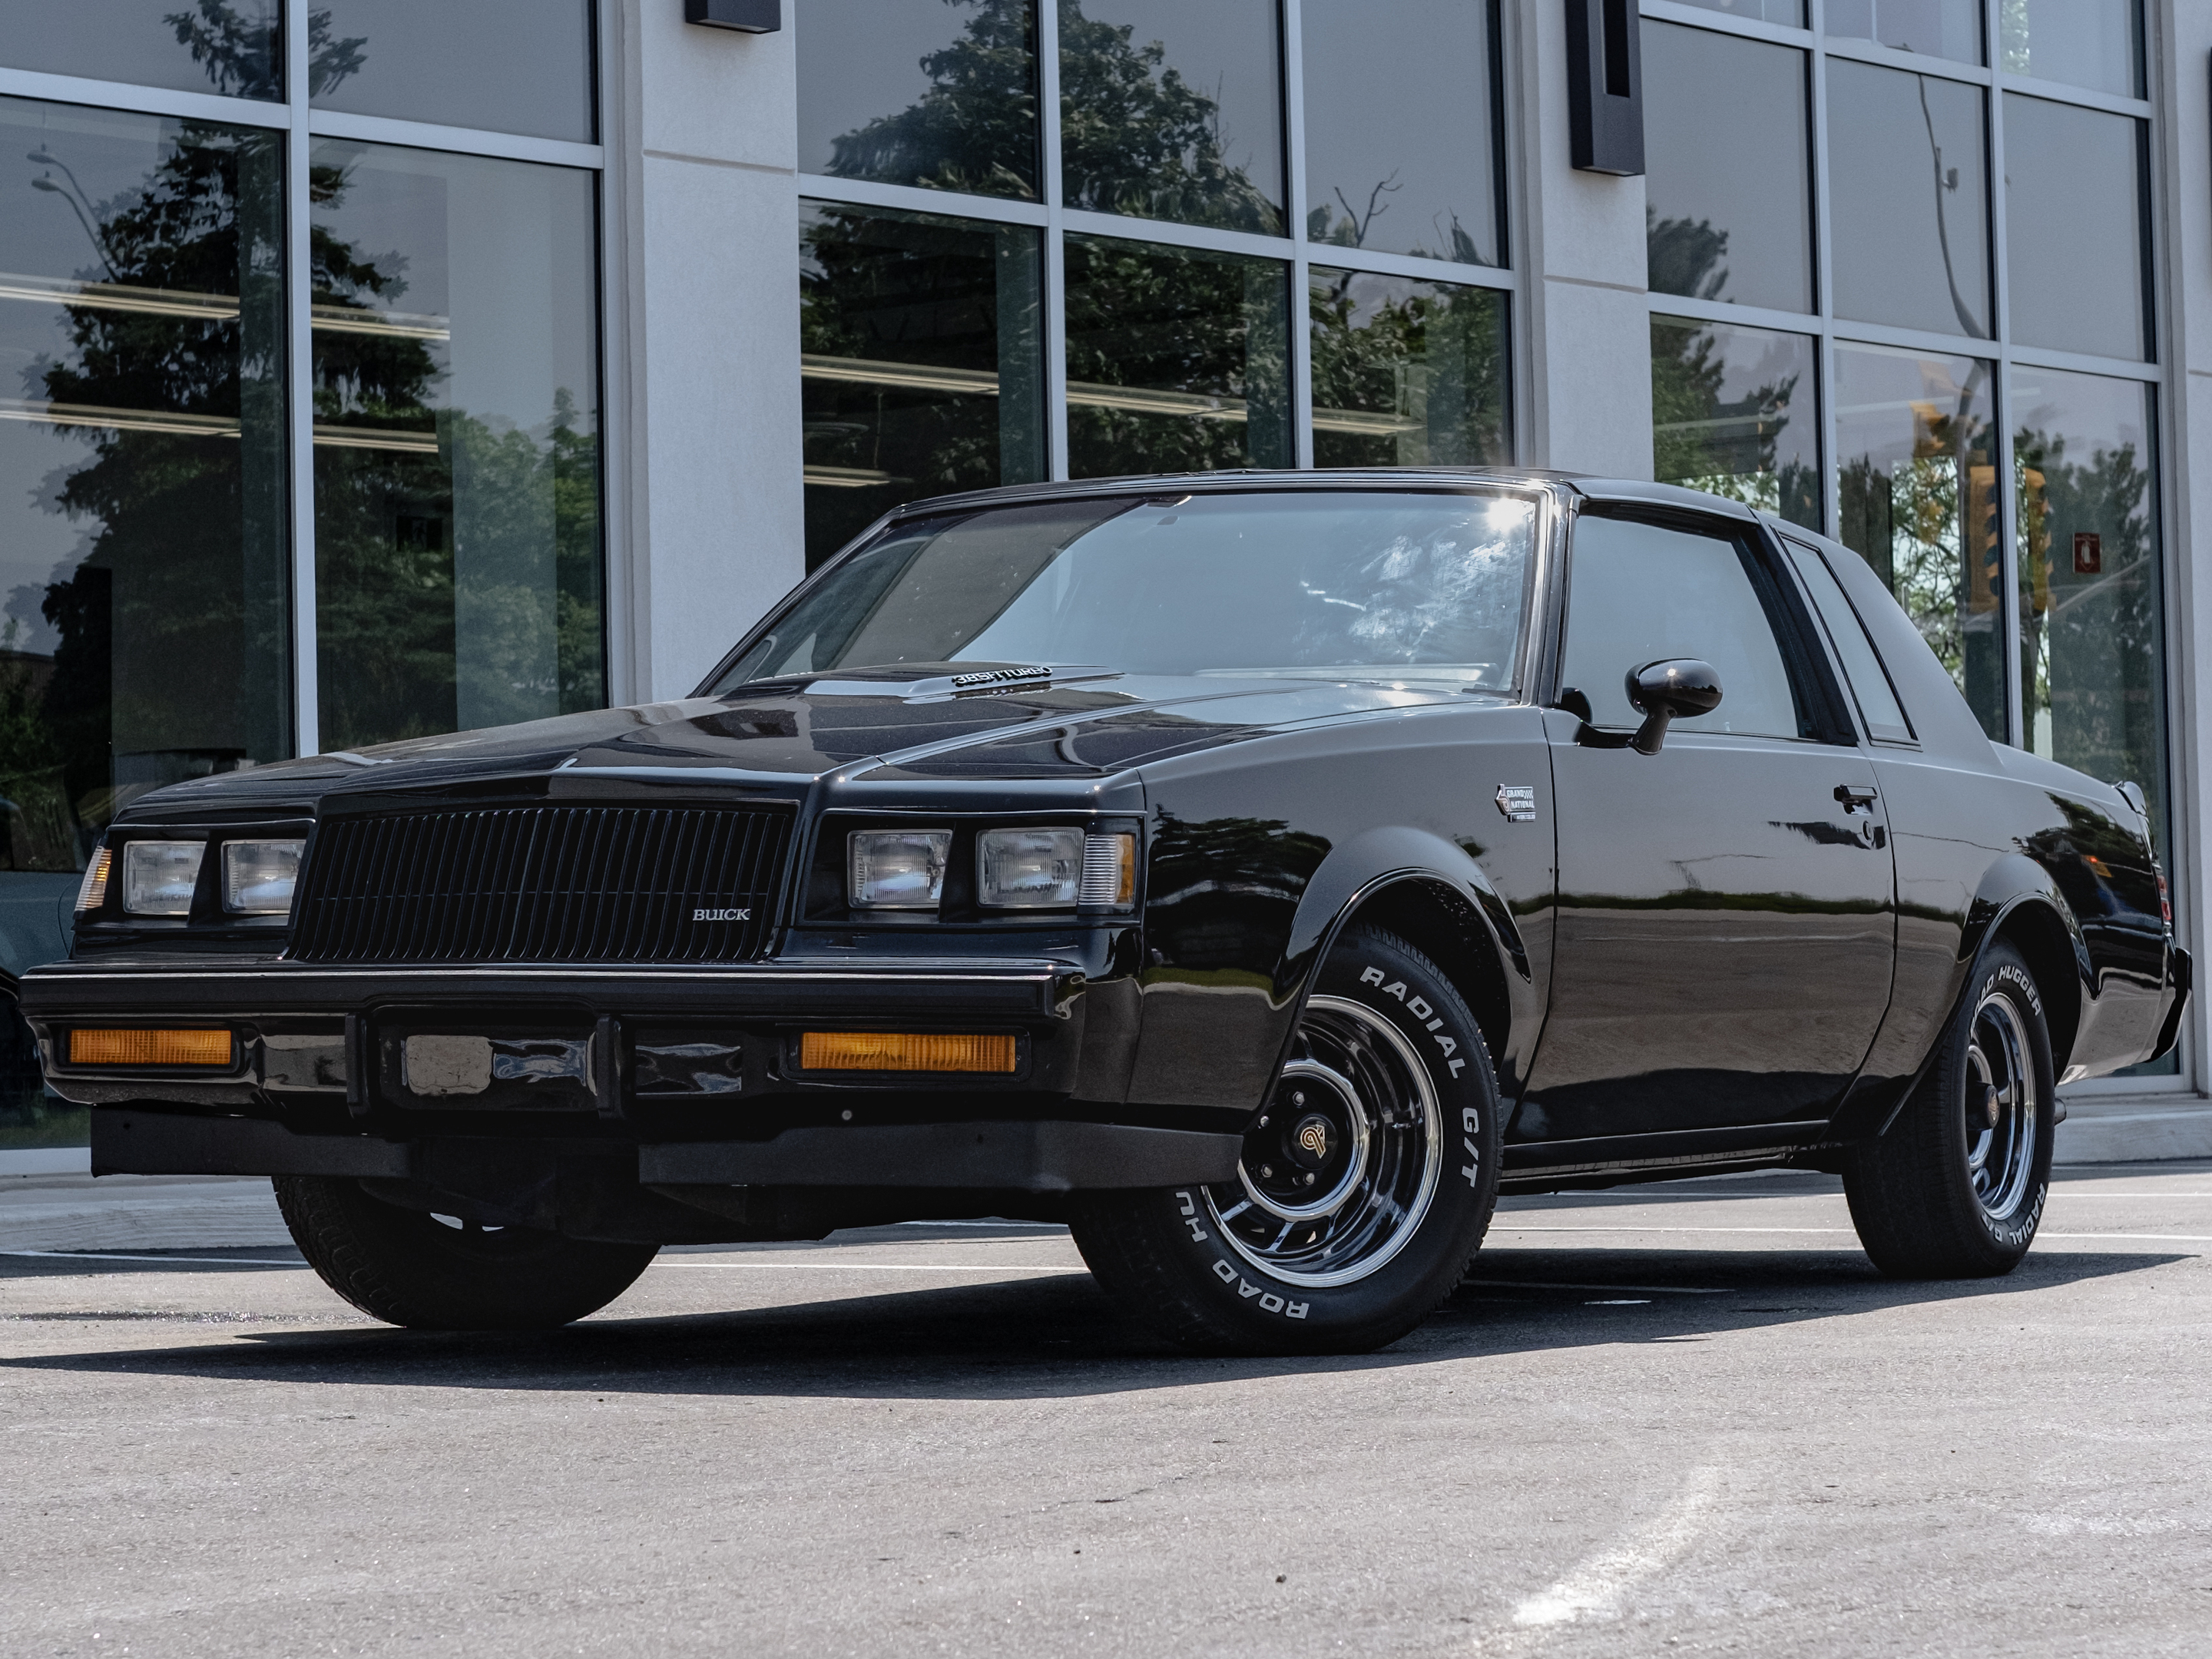 1987 Buick Regal GRAND NATIONAL | LOW KM | FAMILY OWNED